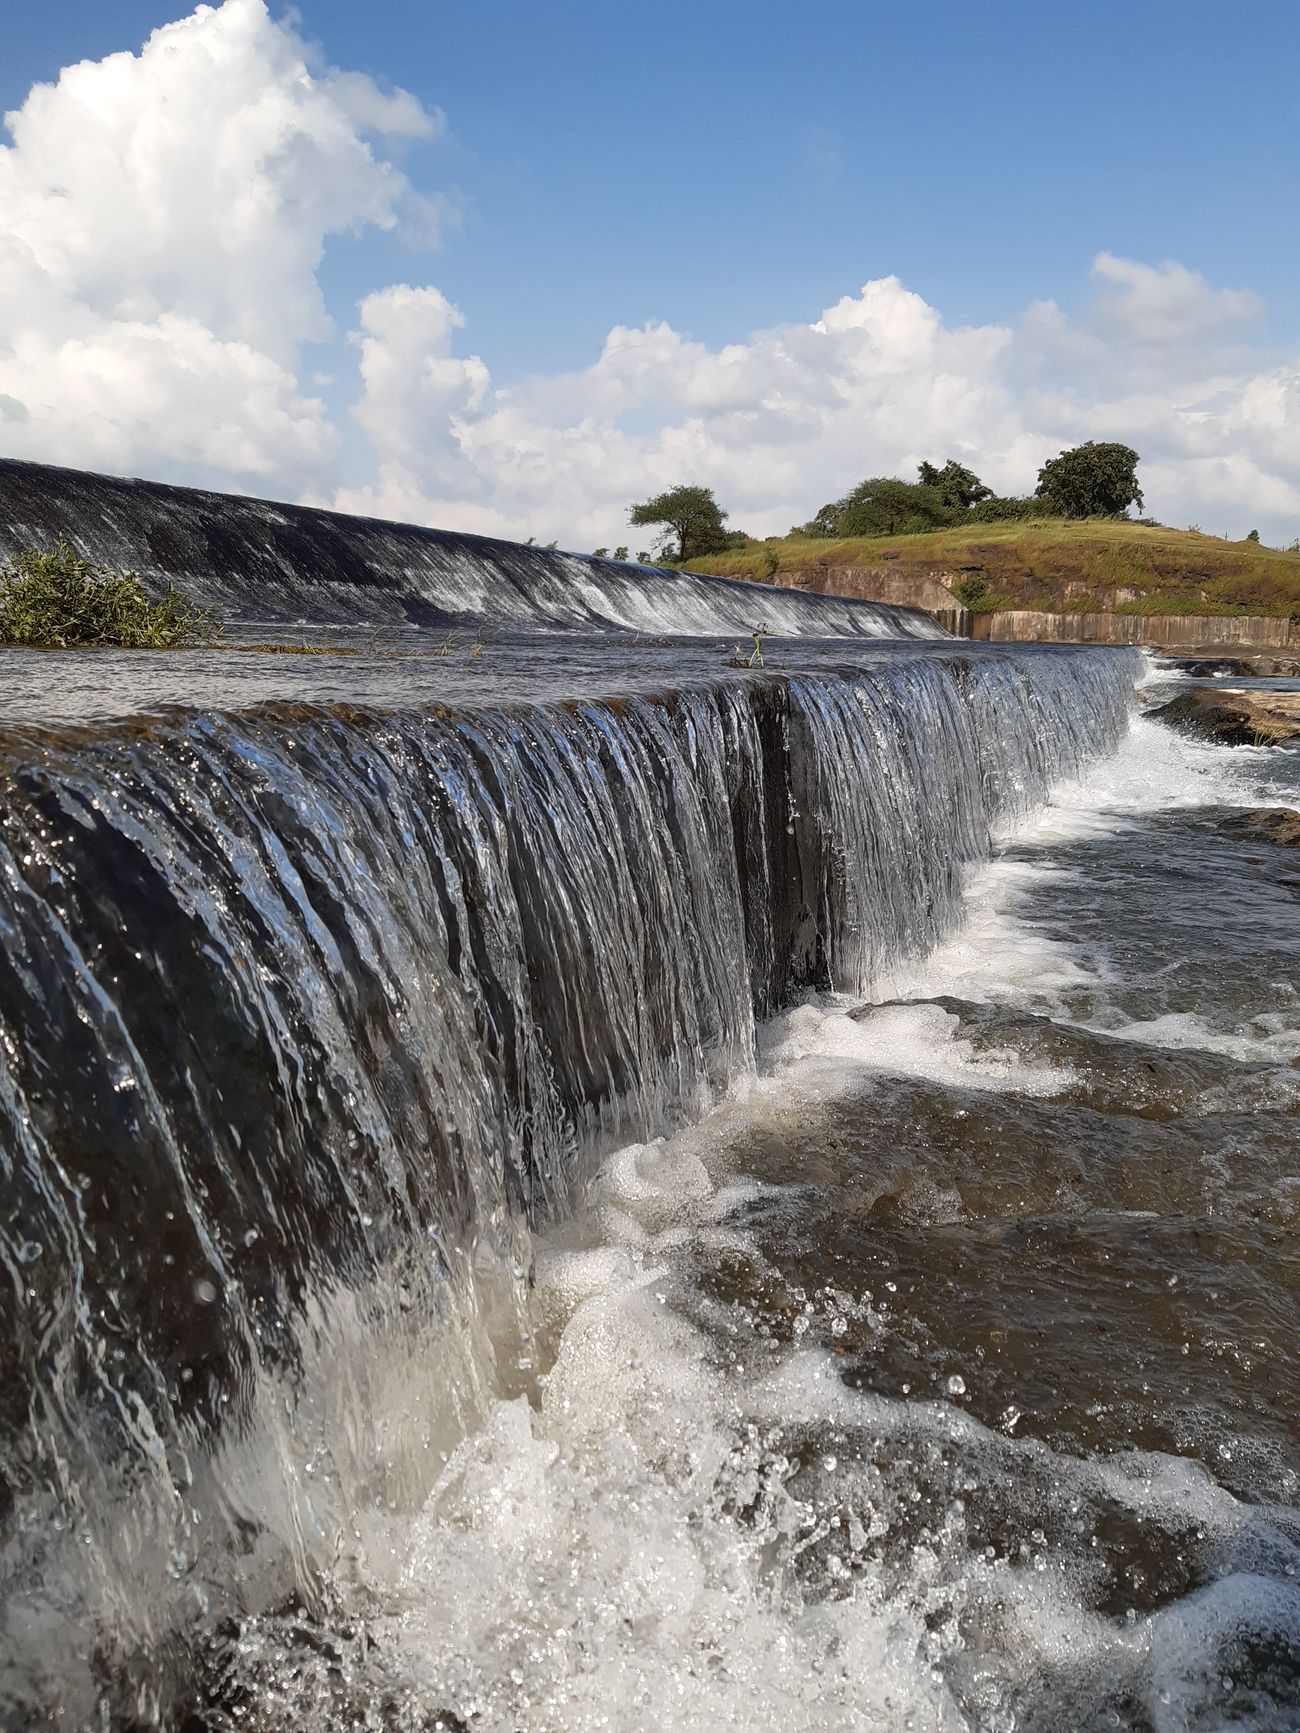 Water cascading down the Ozarkhed Dam on the Onanda River near Dindori